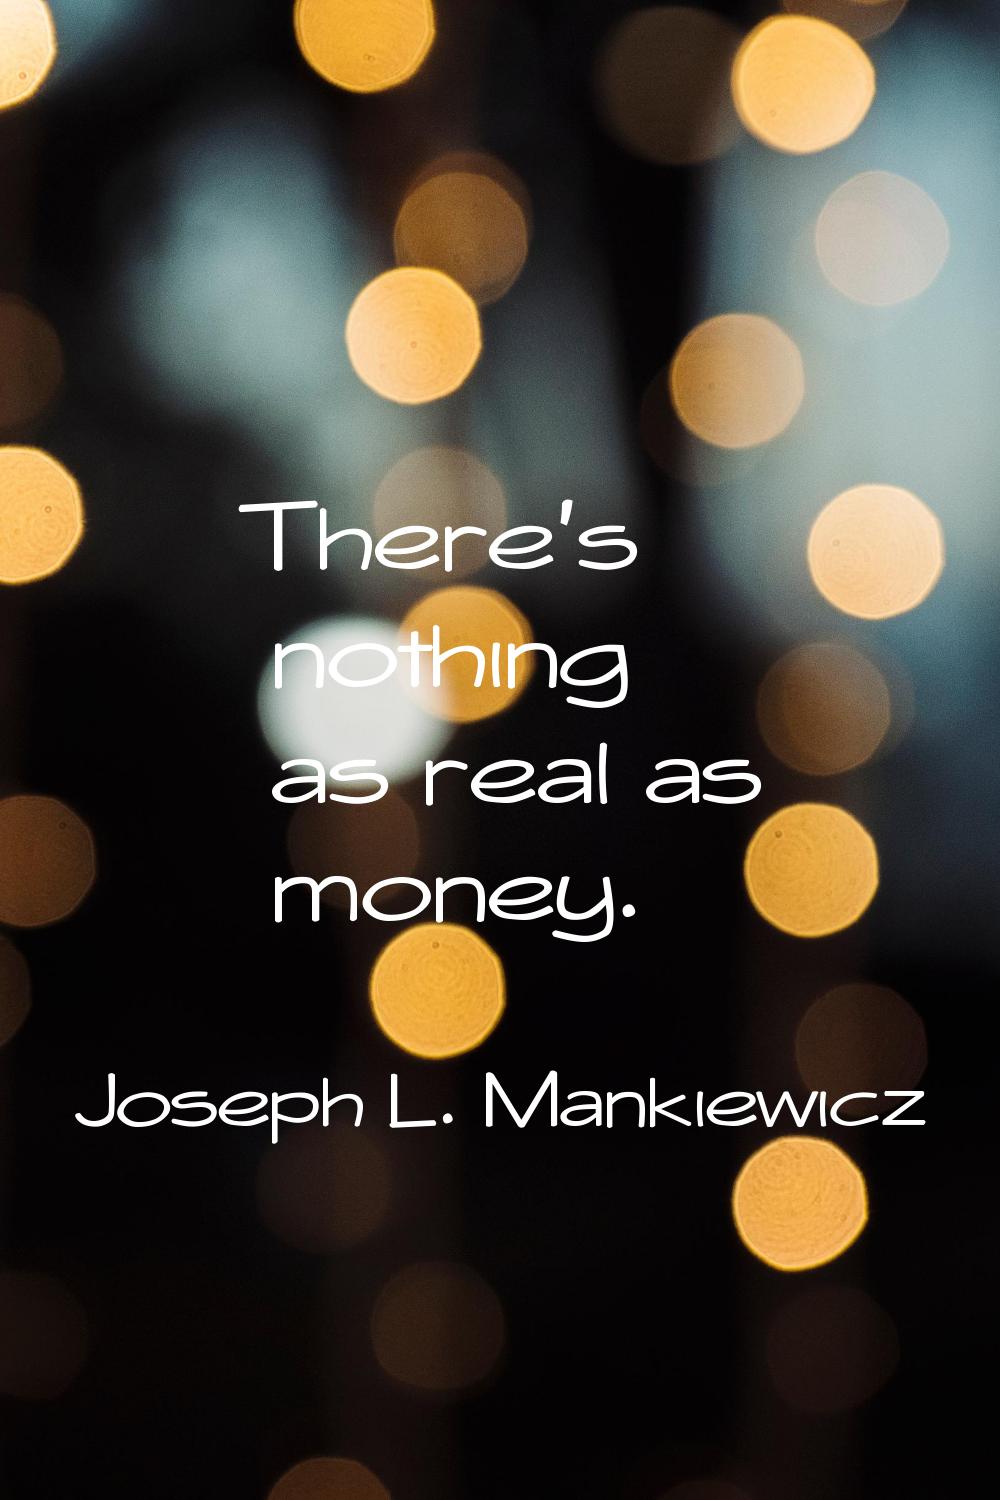 There's nothing as real as money.